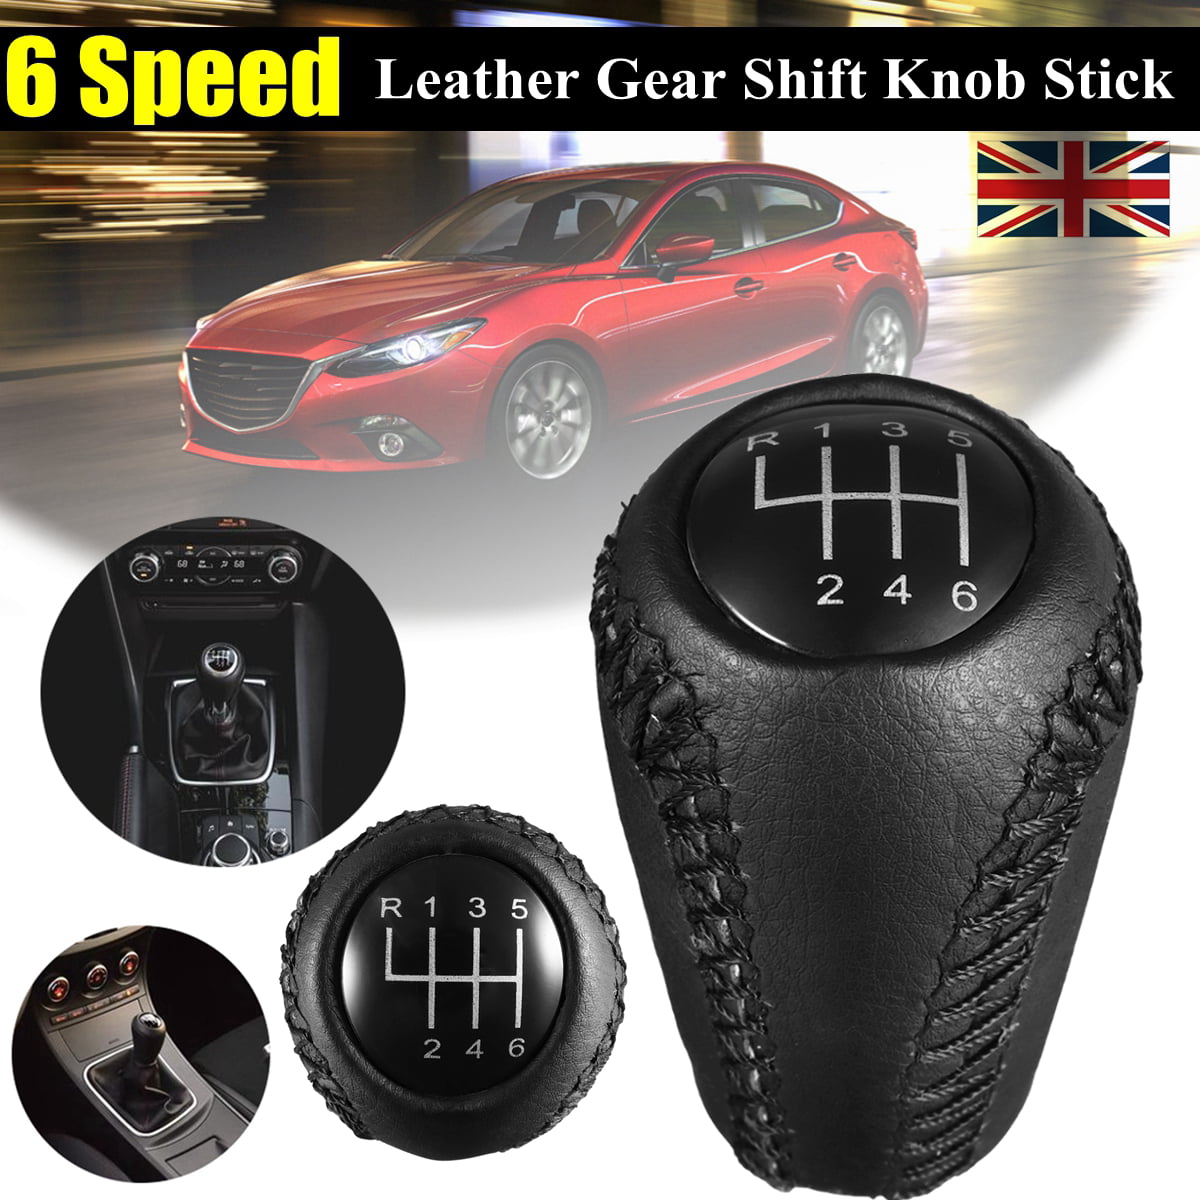 Fit for Mazda 3 CX-5 6 Speed Genuine Leather Manual Transmission Gear Shift Knob